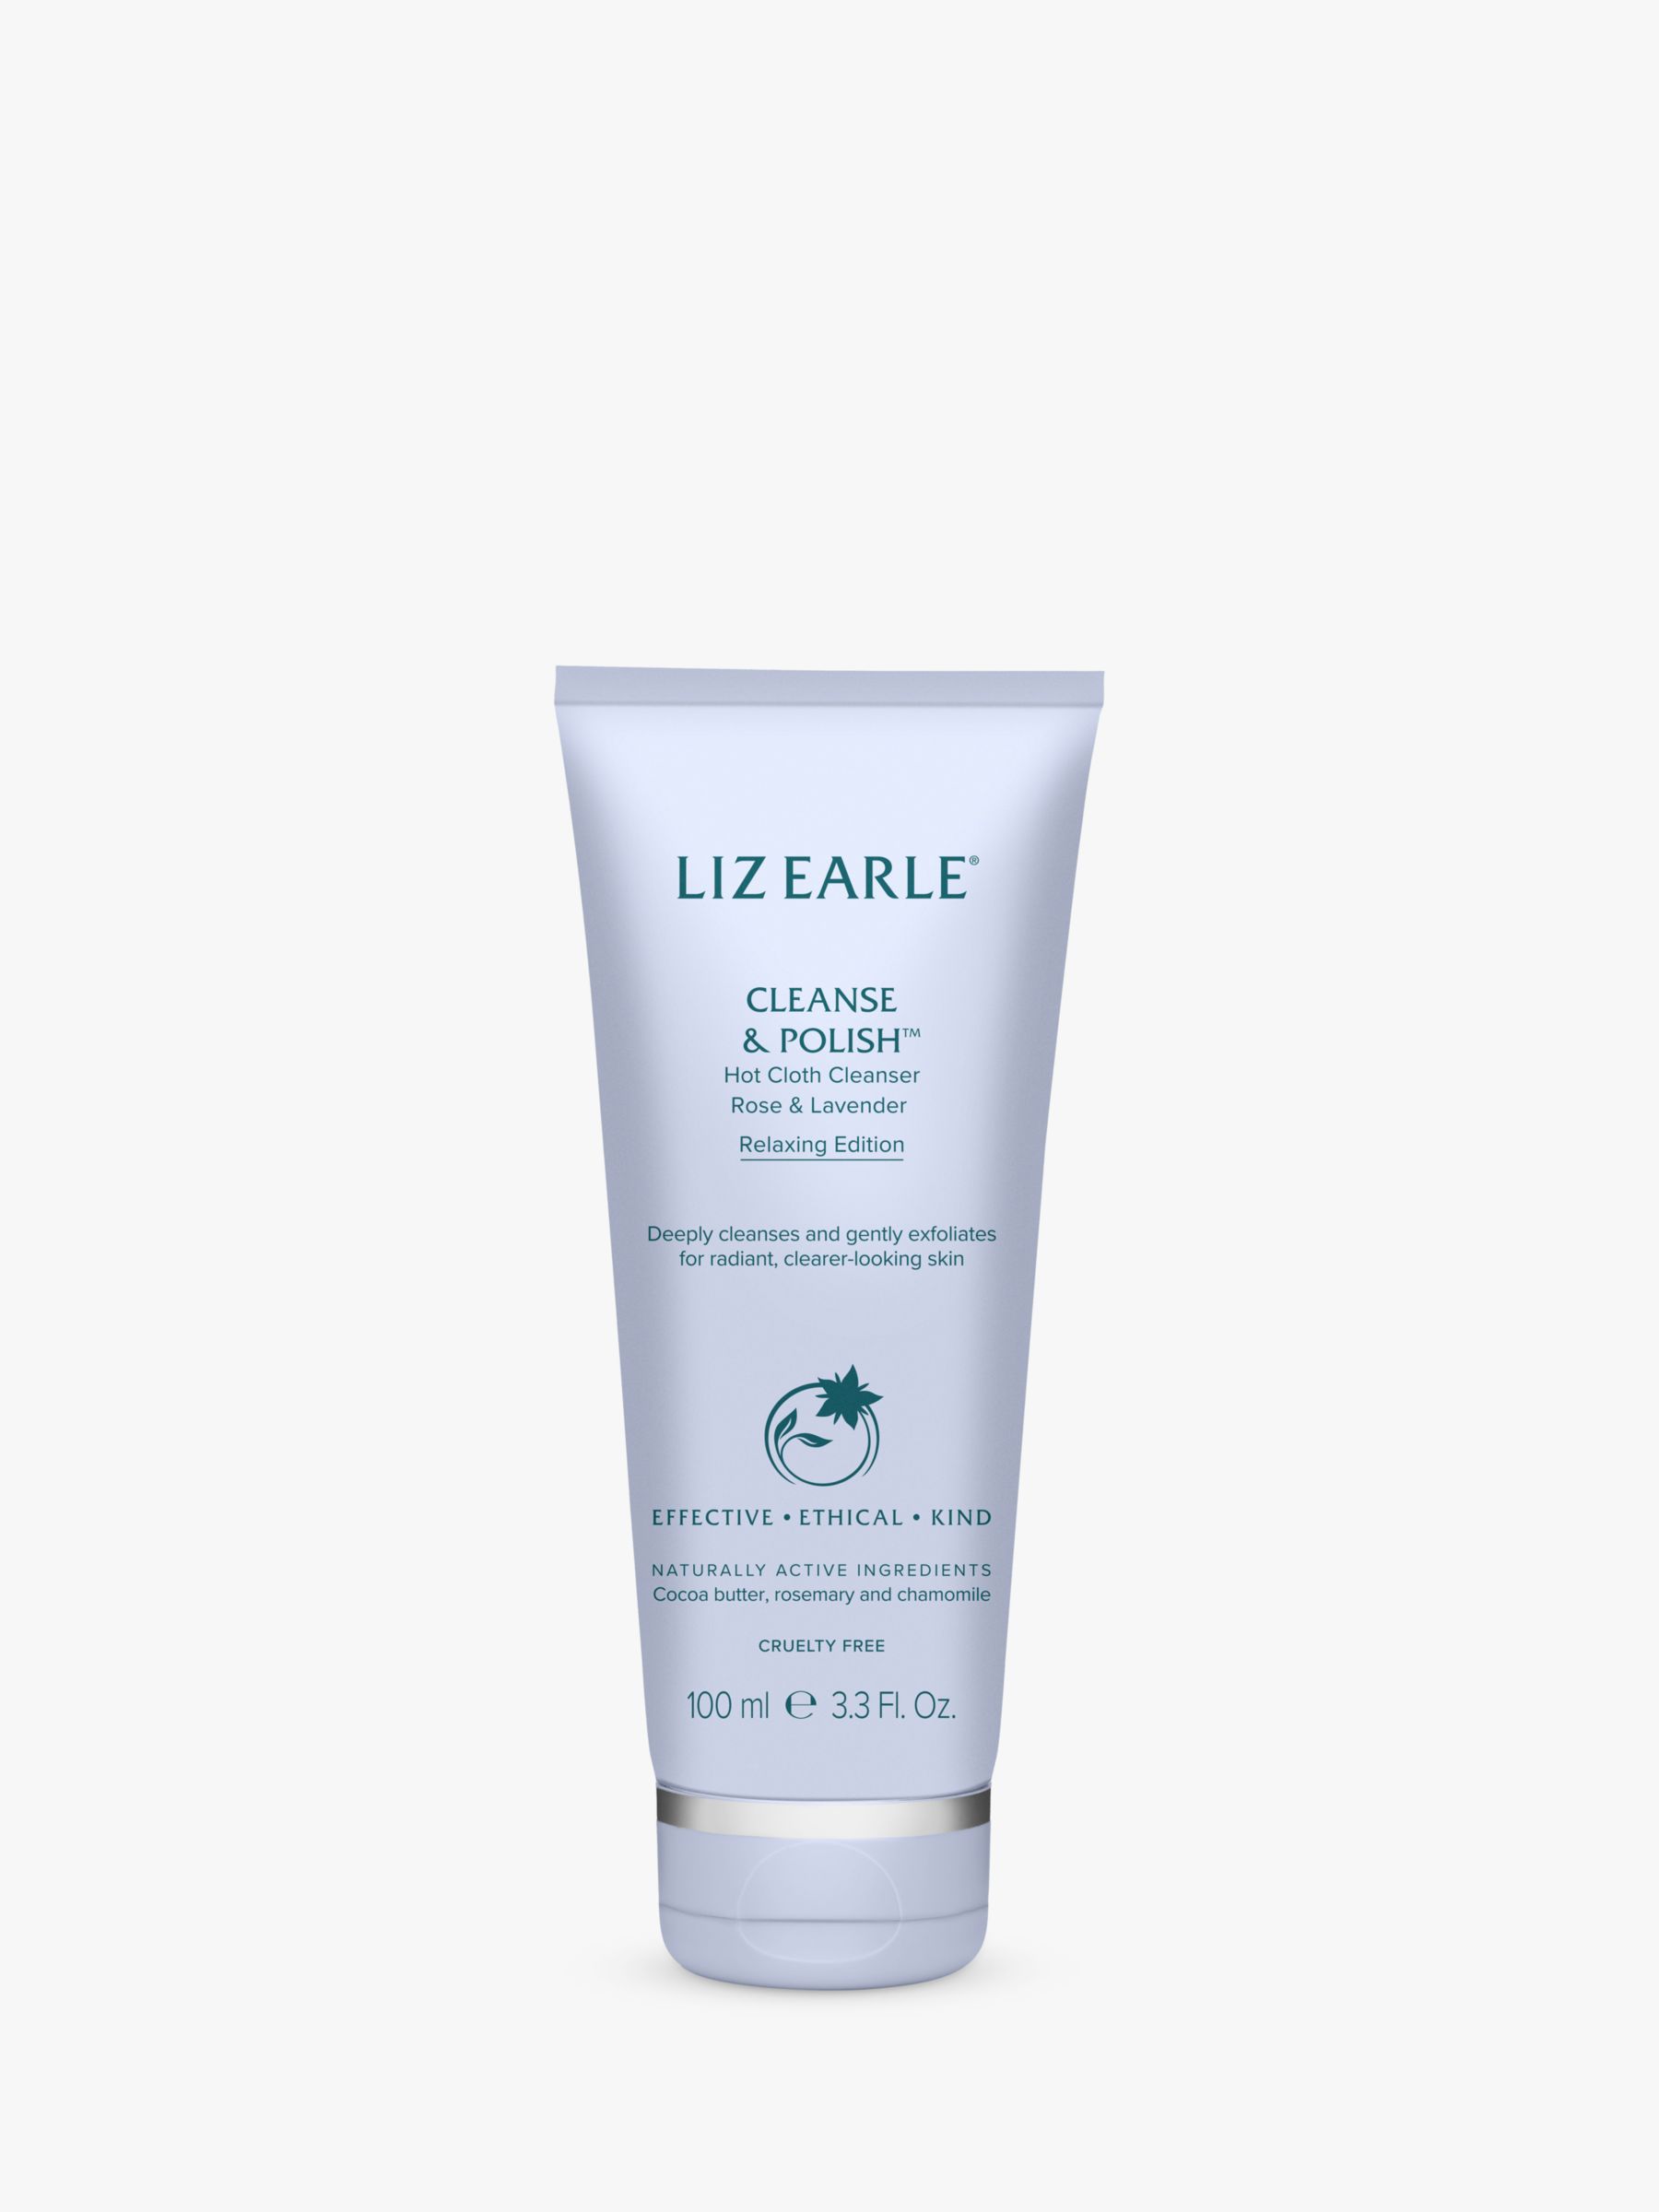 Liz Earle Cleanse & Polish™ Hot Cloth Cleanser Relaxing Edition, 100ml 1